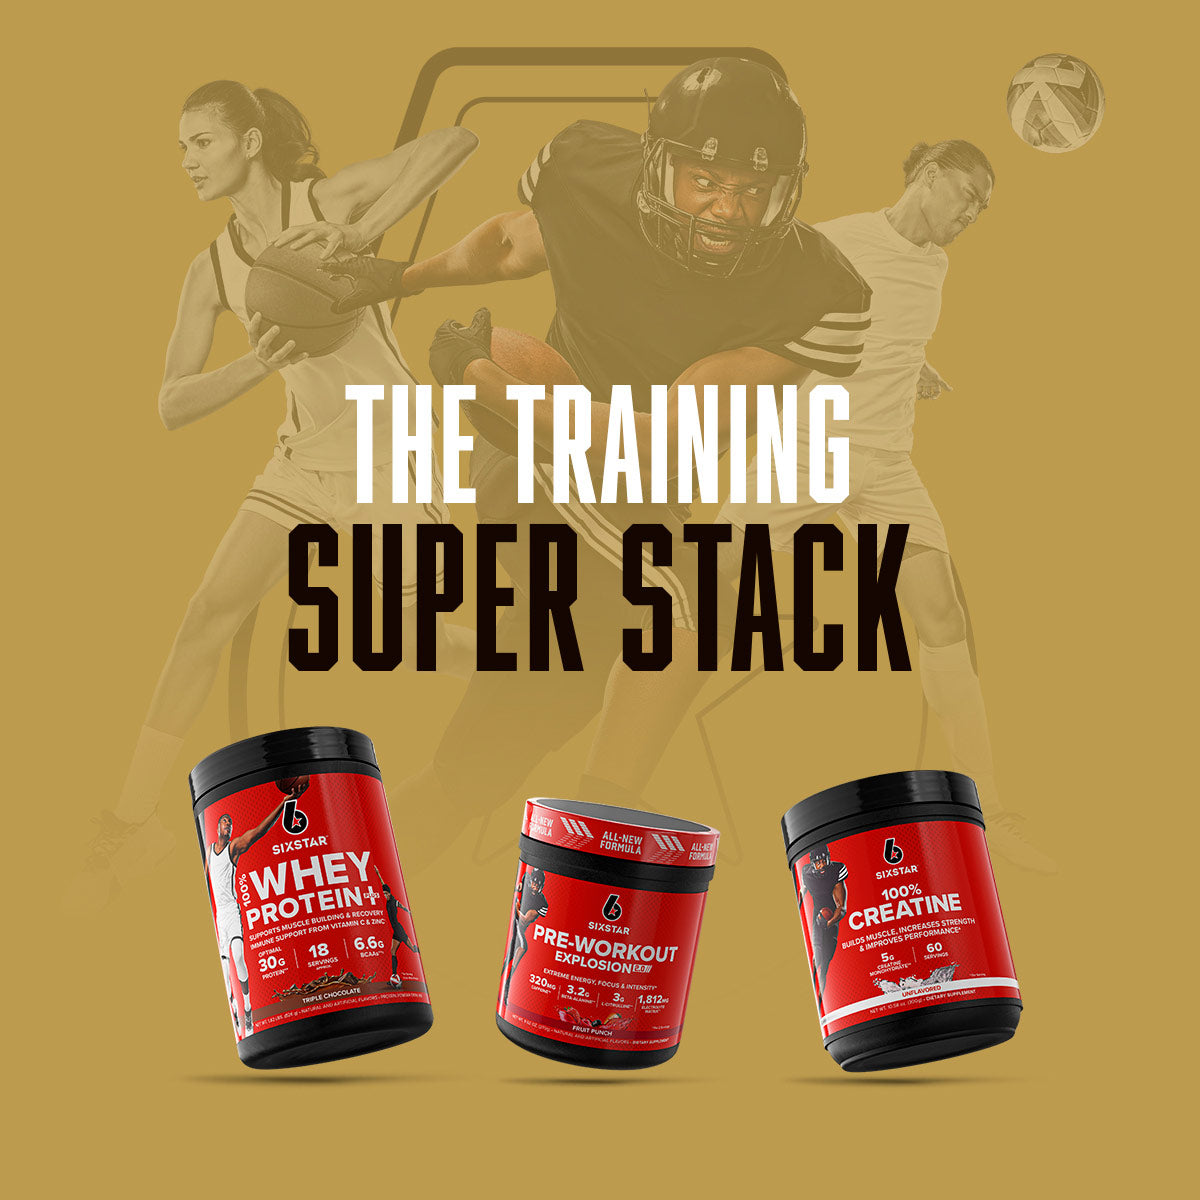 The Training Super Stack